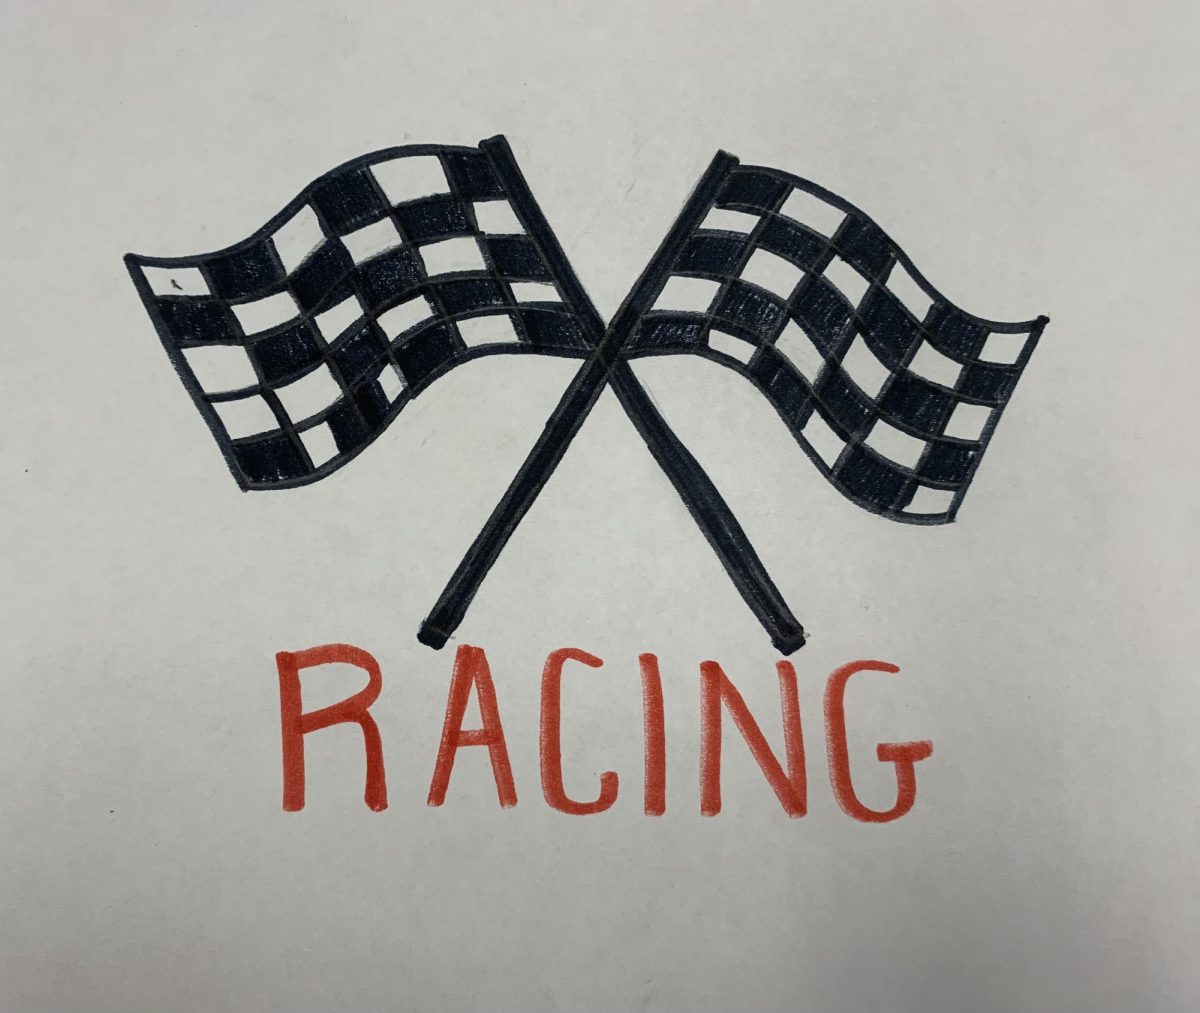 Flags are often used in racing to communicate important messages to drivers.